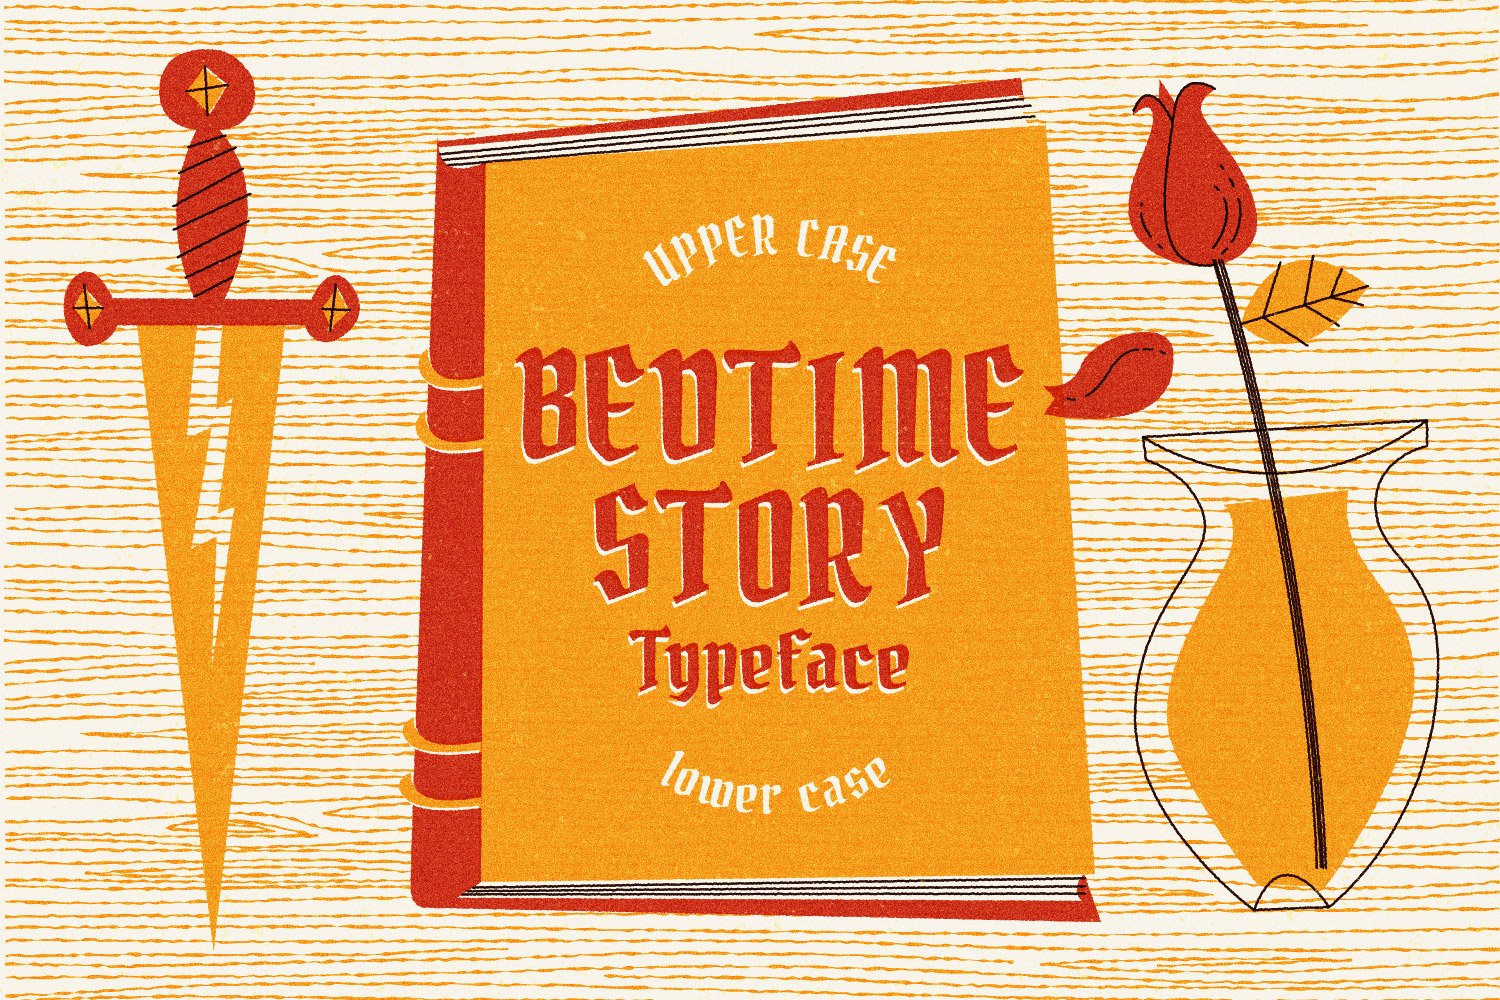 Bedtime Story Typeface cover image.